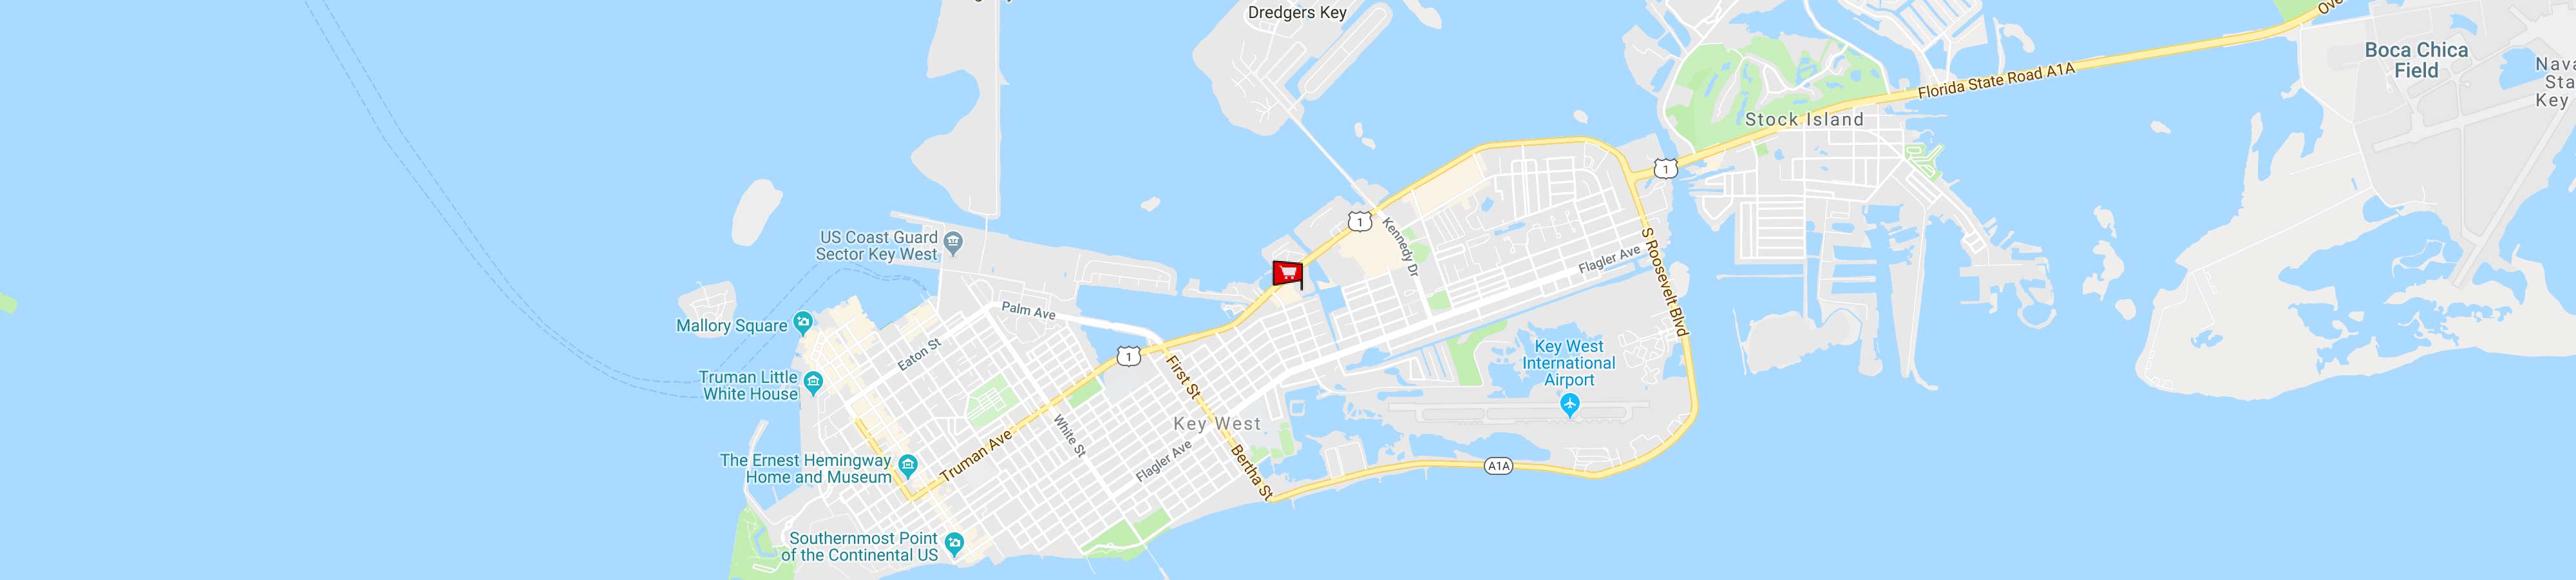 Key West Store Map